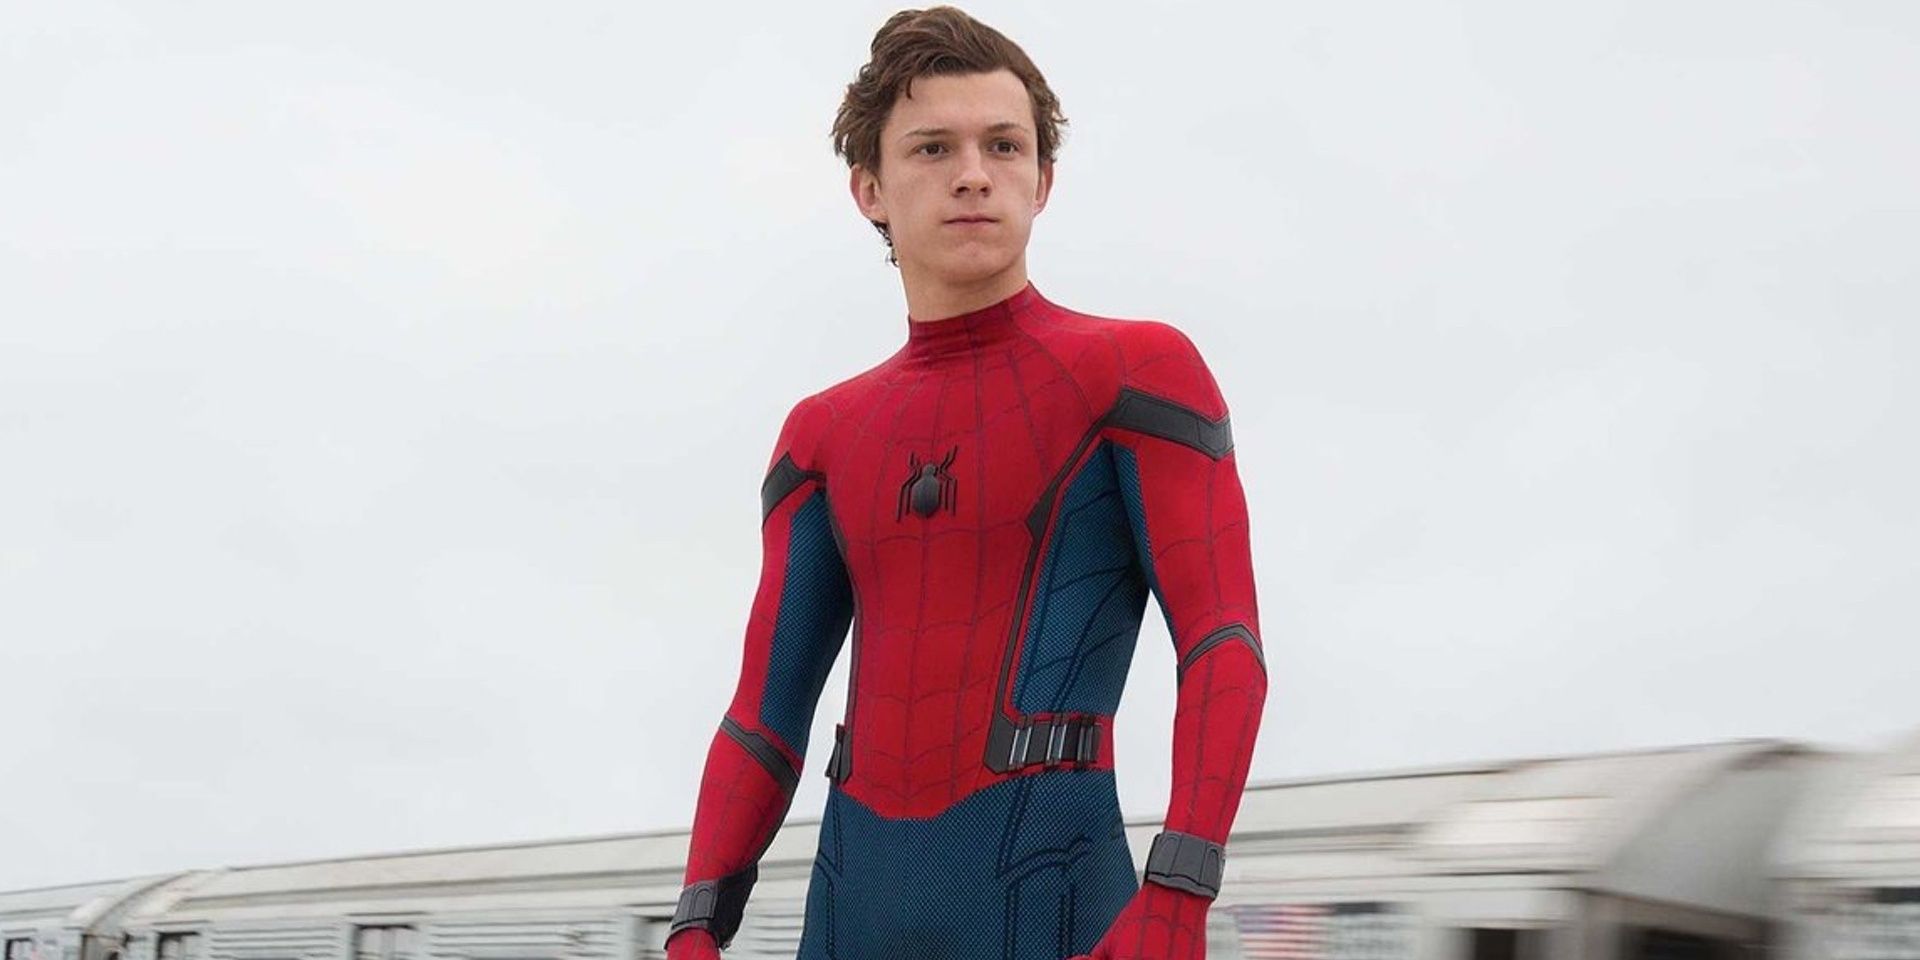 Spider-Man 3's Tom Holland Teases Best Day of His Career With Set Photo